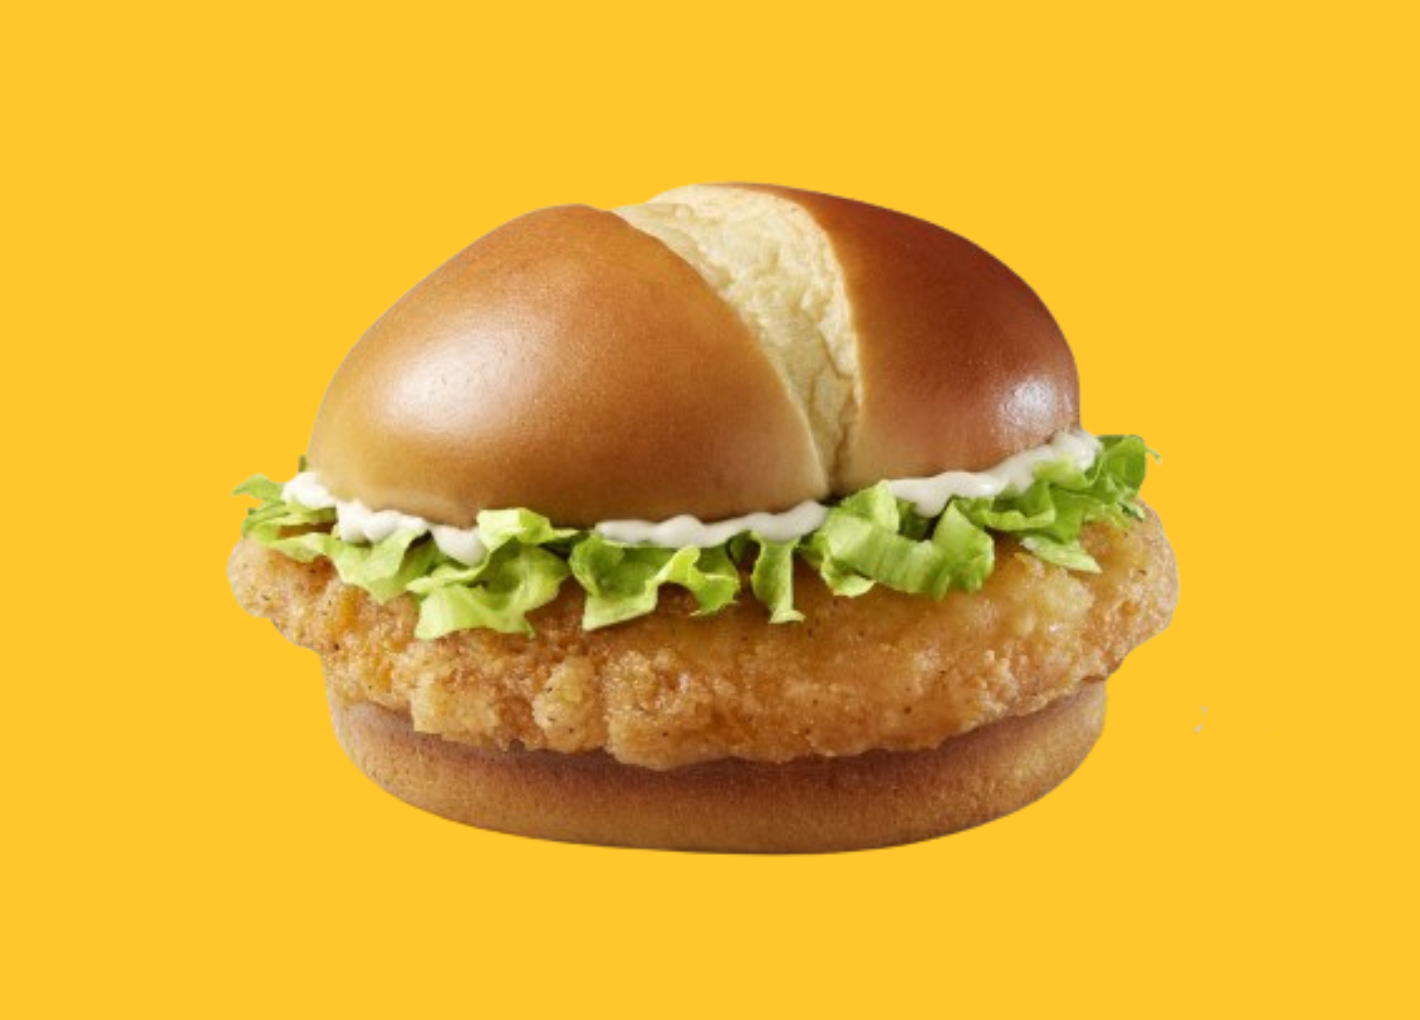 Chicken McCrispy will be a permanent item on McDonald's menu from